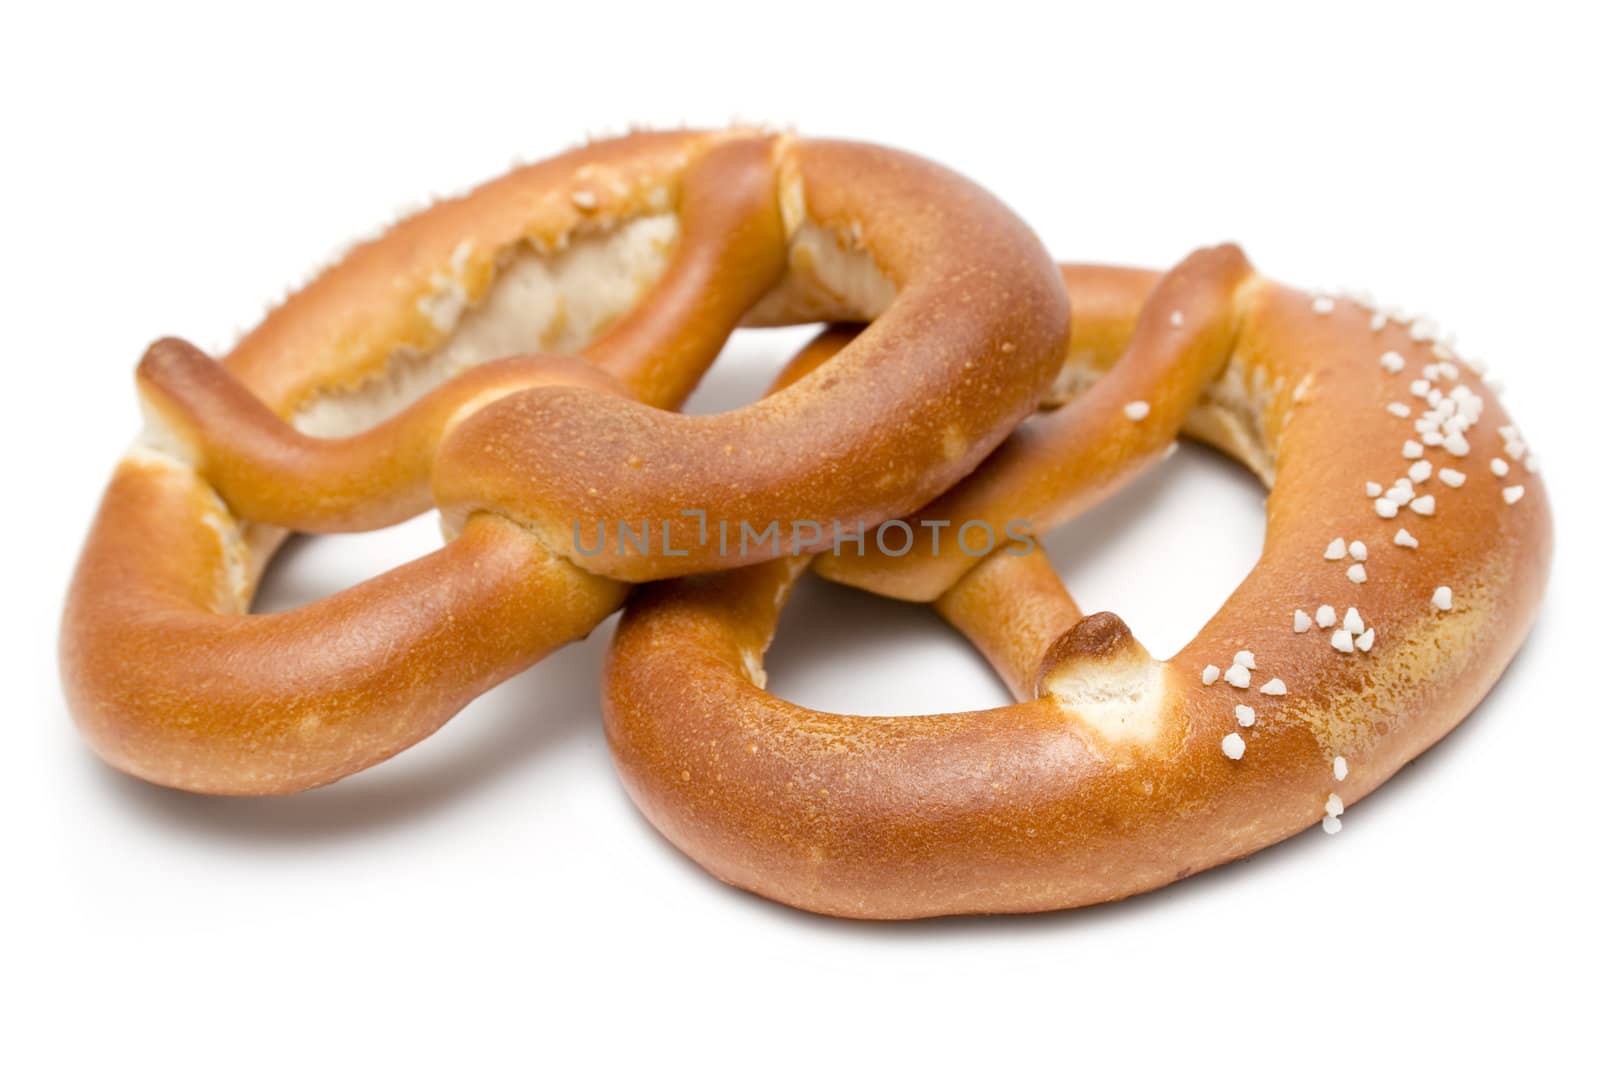 Salted pretzels isolated on a white background.